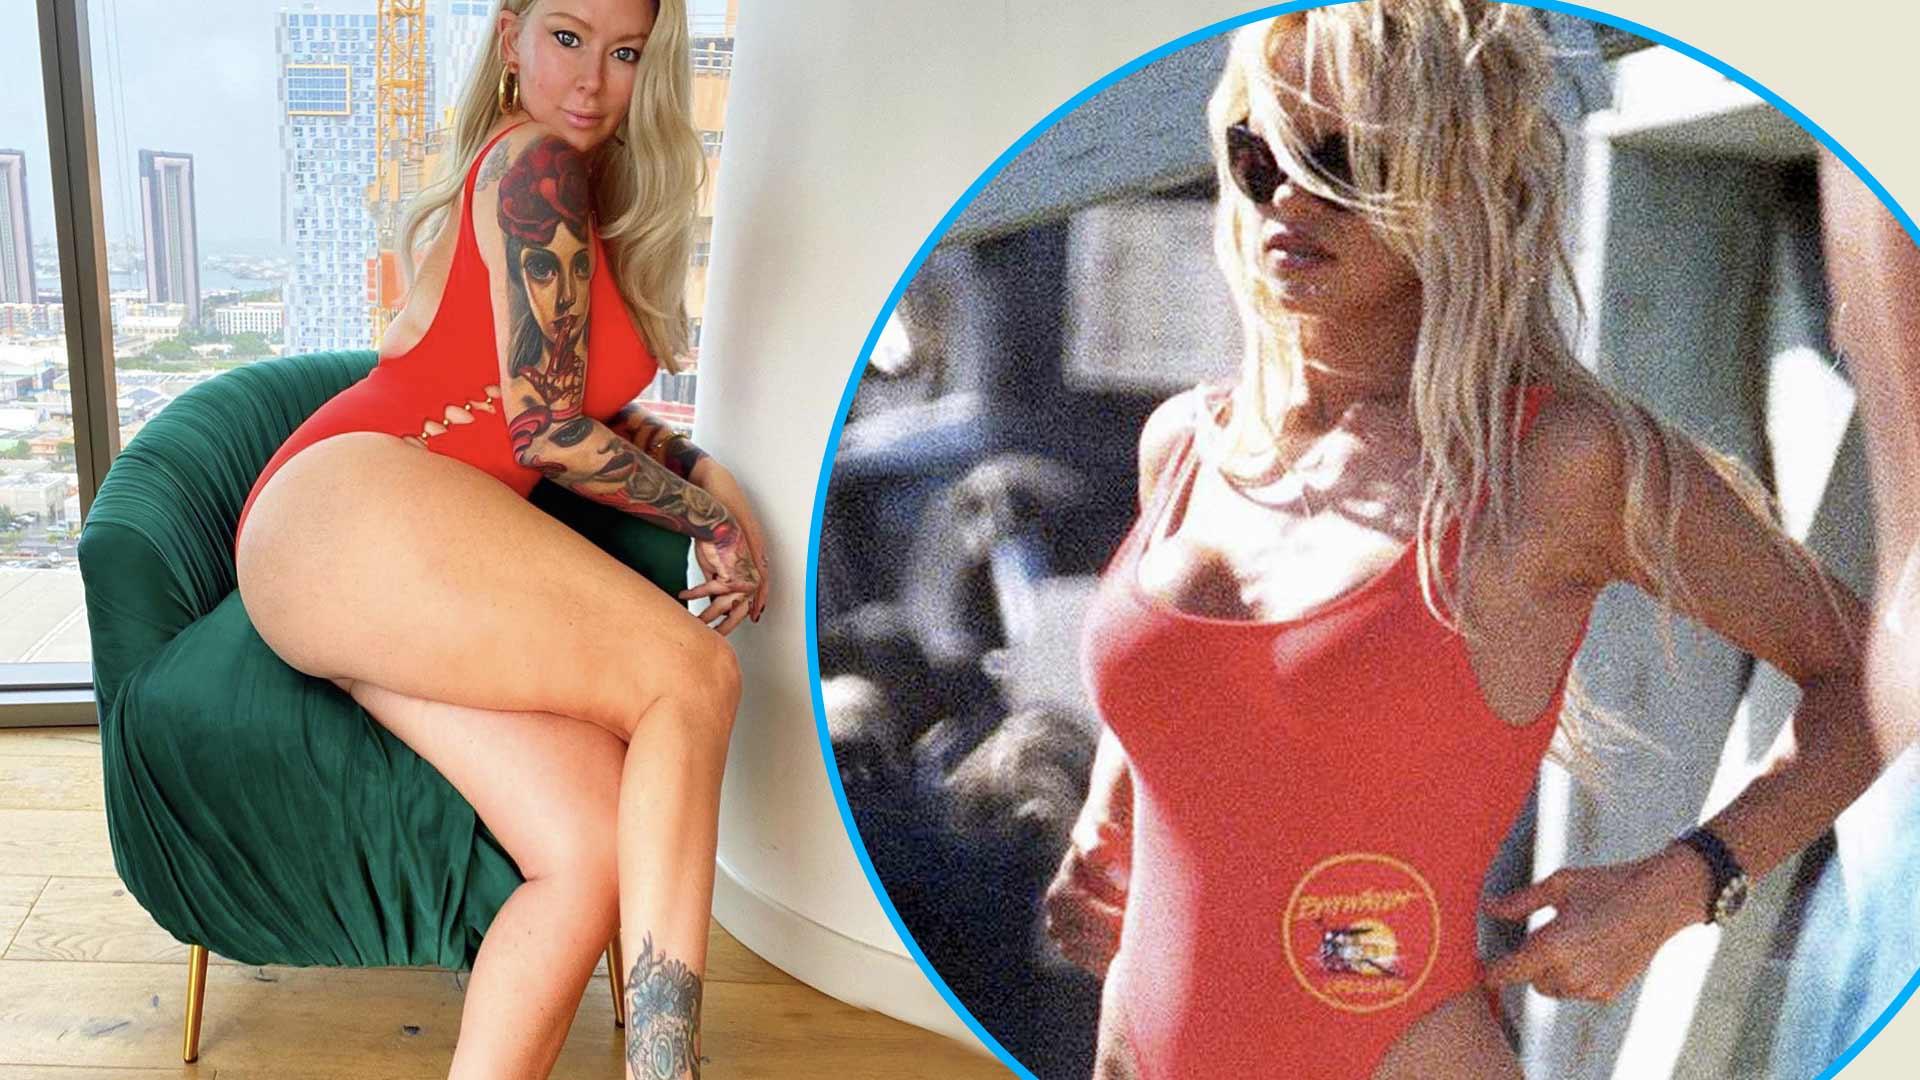 Jenna Jameson Channels Pamela Anderson’s Baywatch Look To Announce She’s Back On Keto